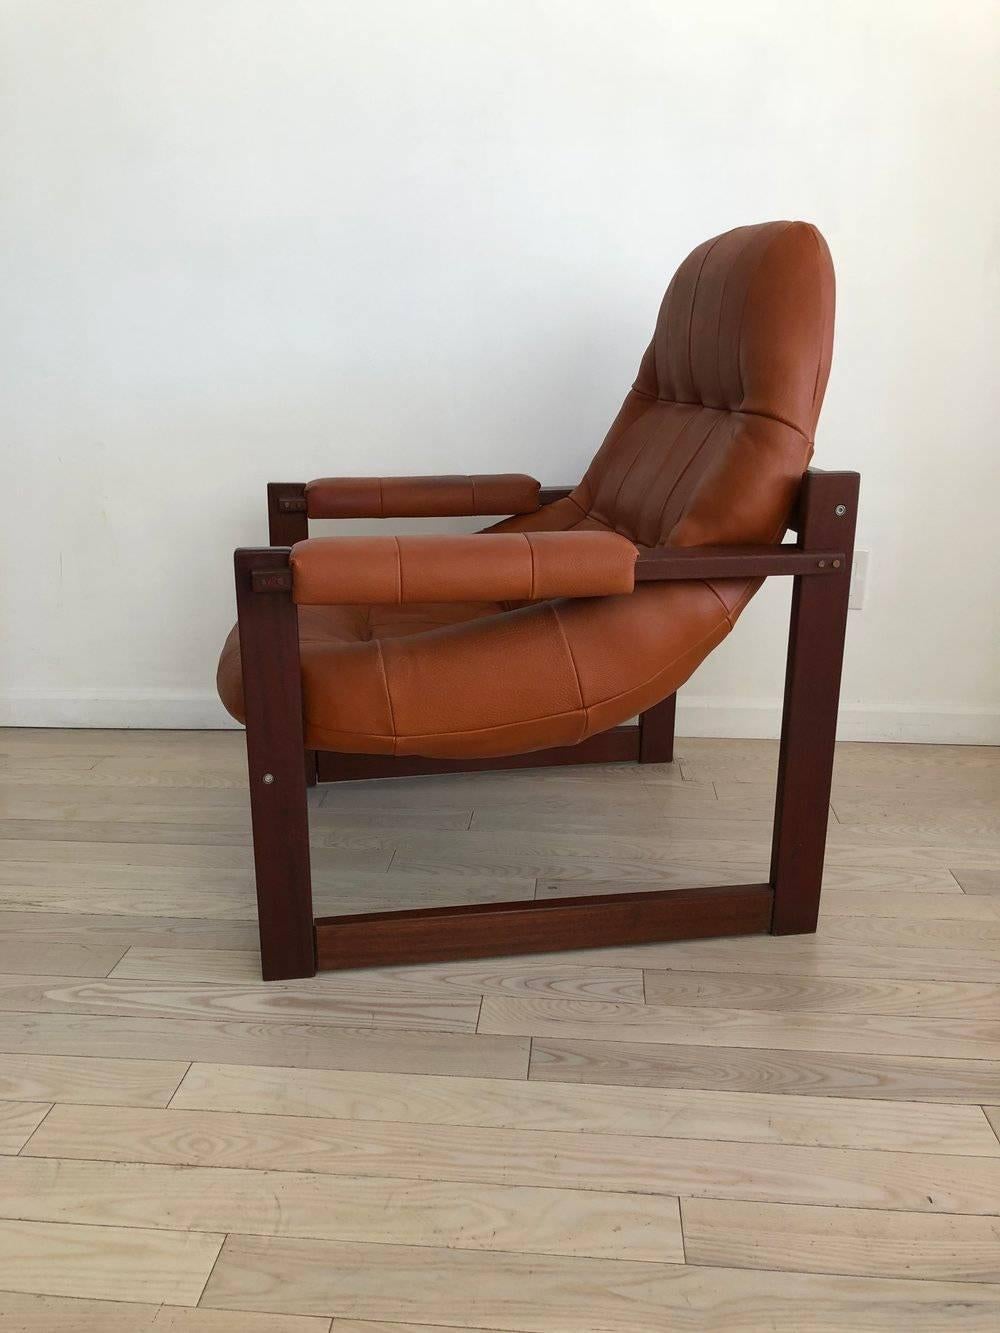 Super rare 1970s leather and Brazilian rosewood lounge armchair. Tufted leather egg shaped floating seat. Super cozy and comfortable. Made in Brazil, circa 1970. Light staining on arm rest and headrest from use. Super sturdy and awesome